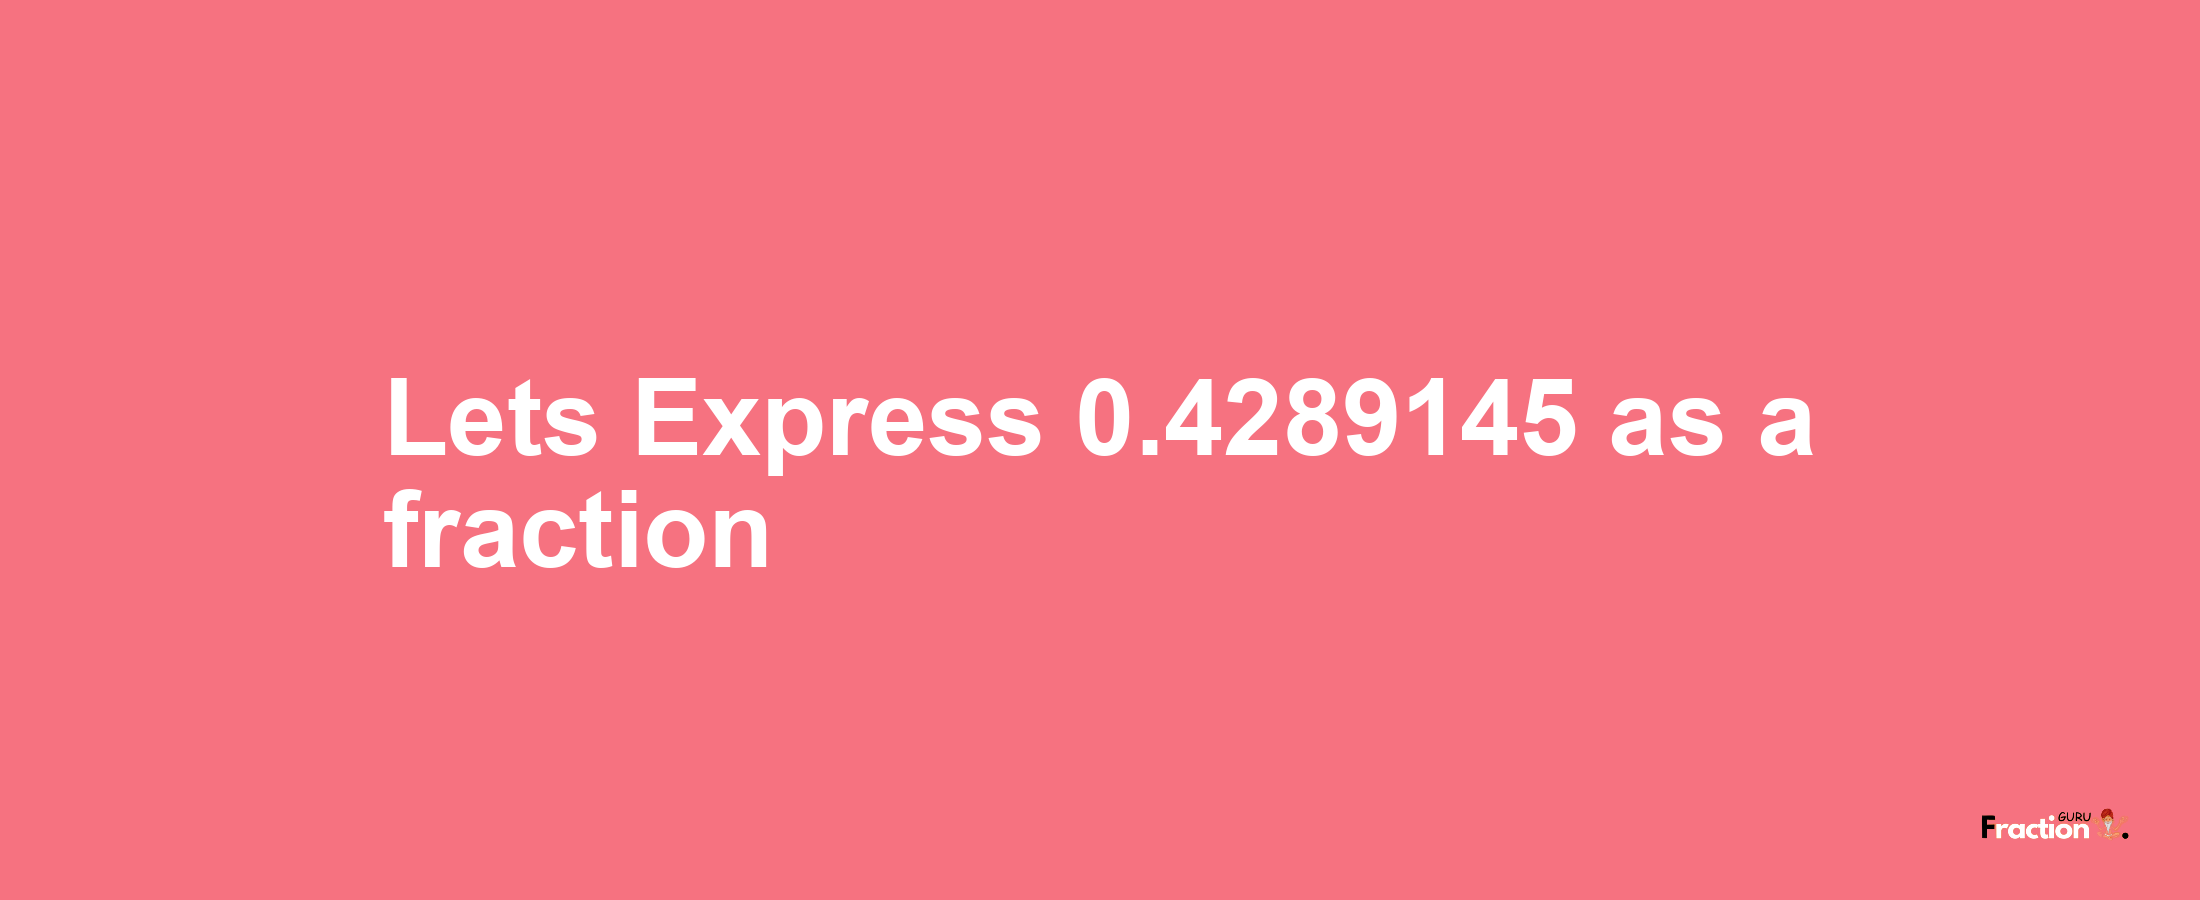 Lets Express 0.4289145 as afraction